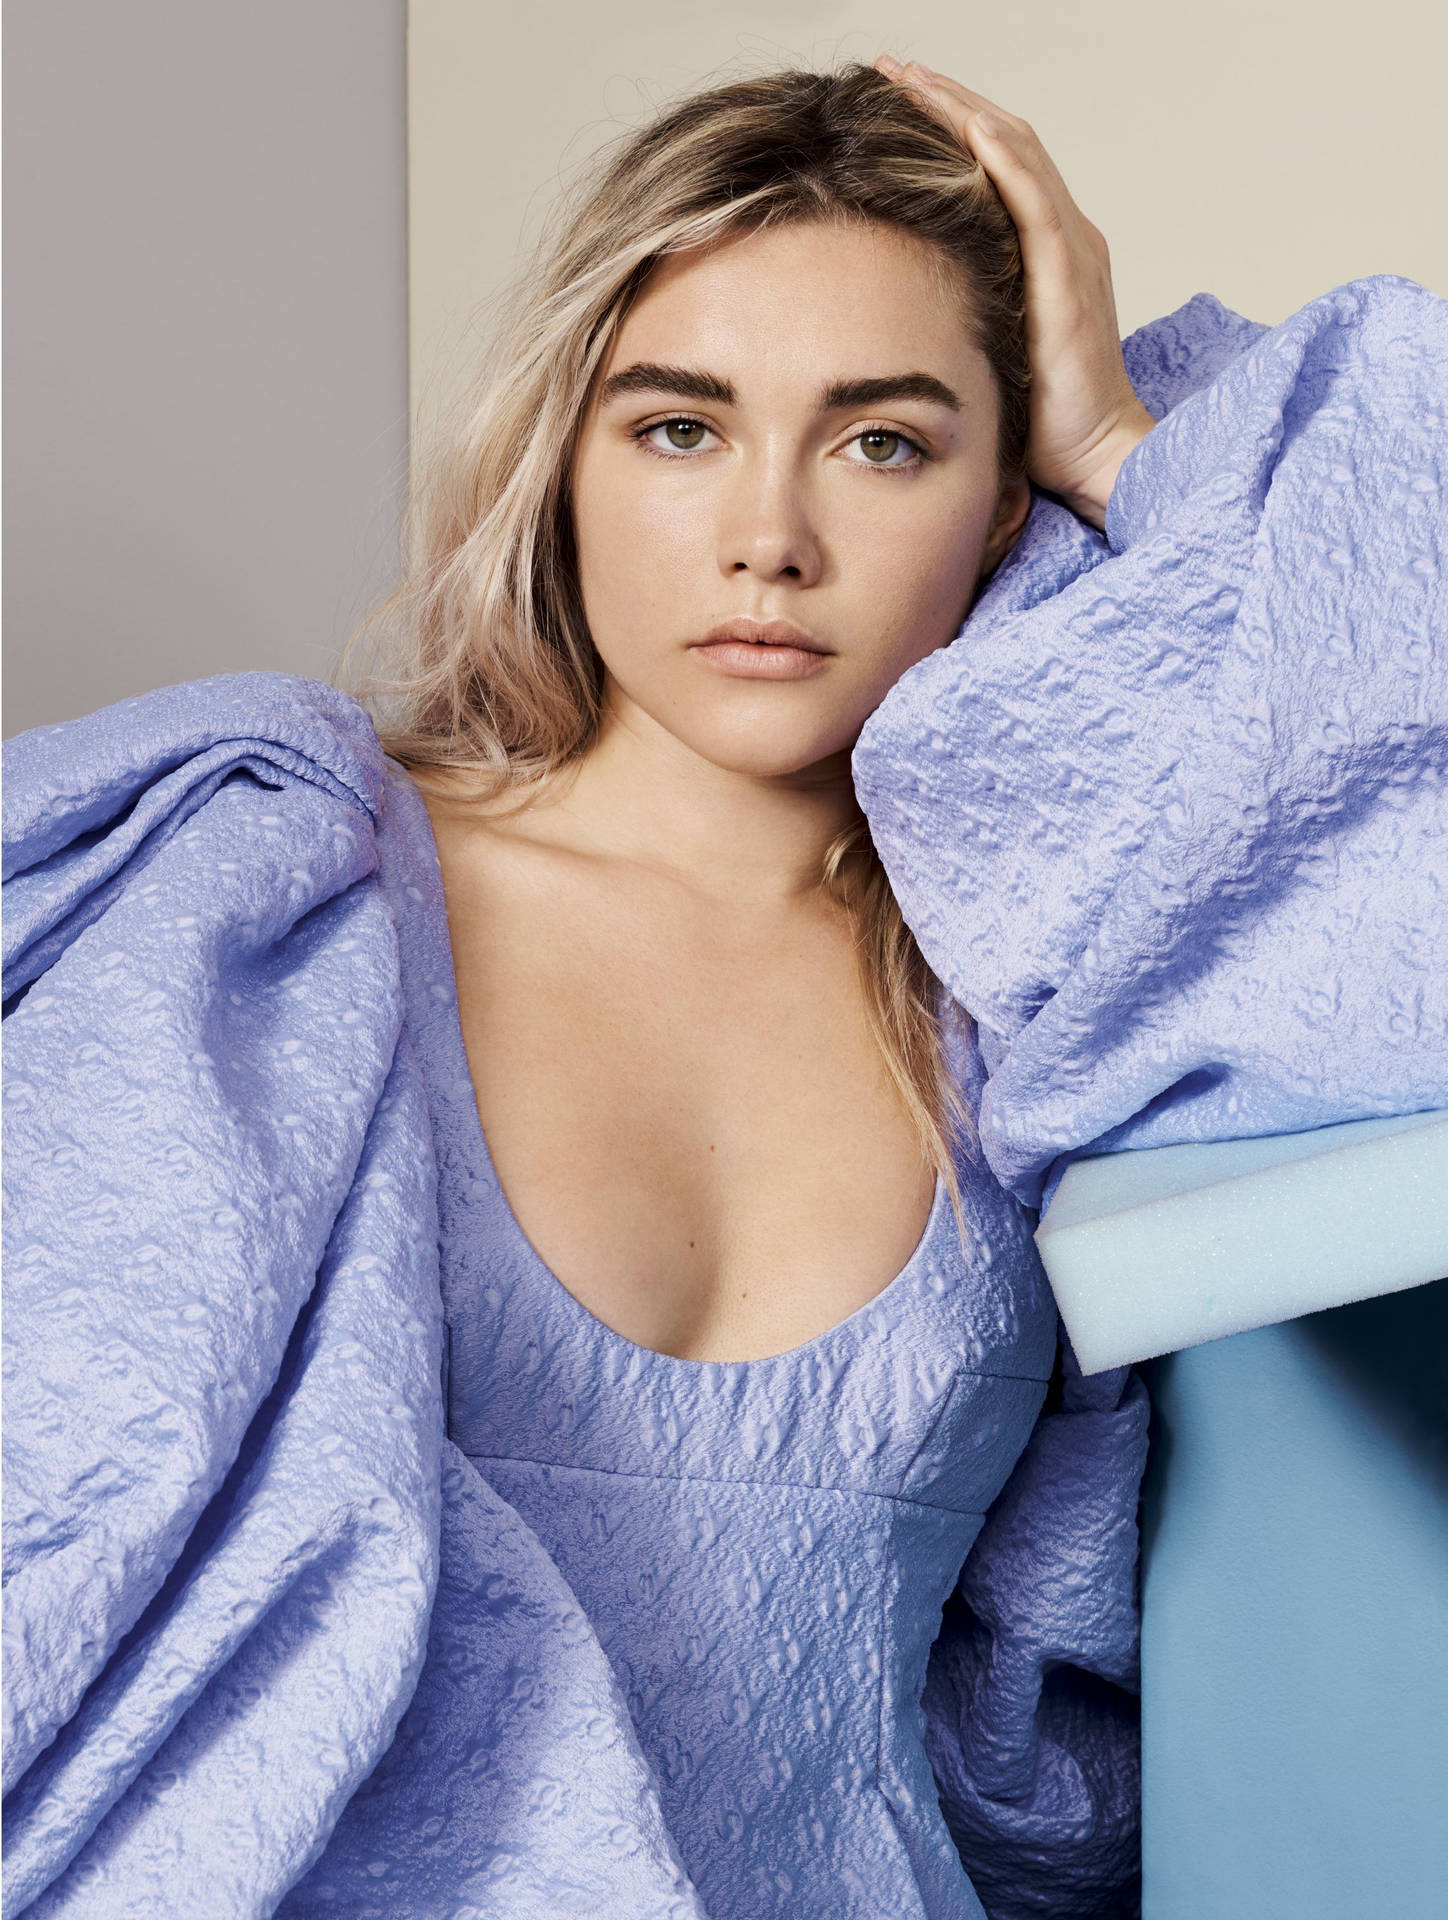 Florence Pugh wearing a blue dress and resting her head on her hand - Florence Pugh